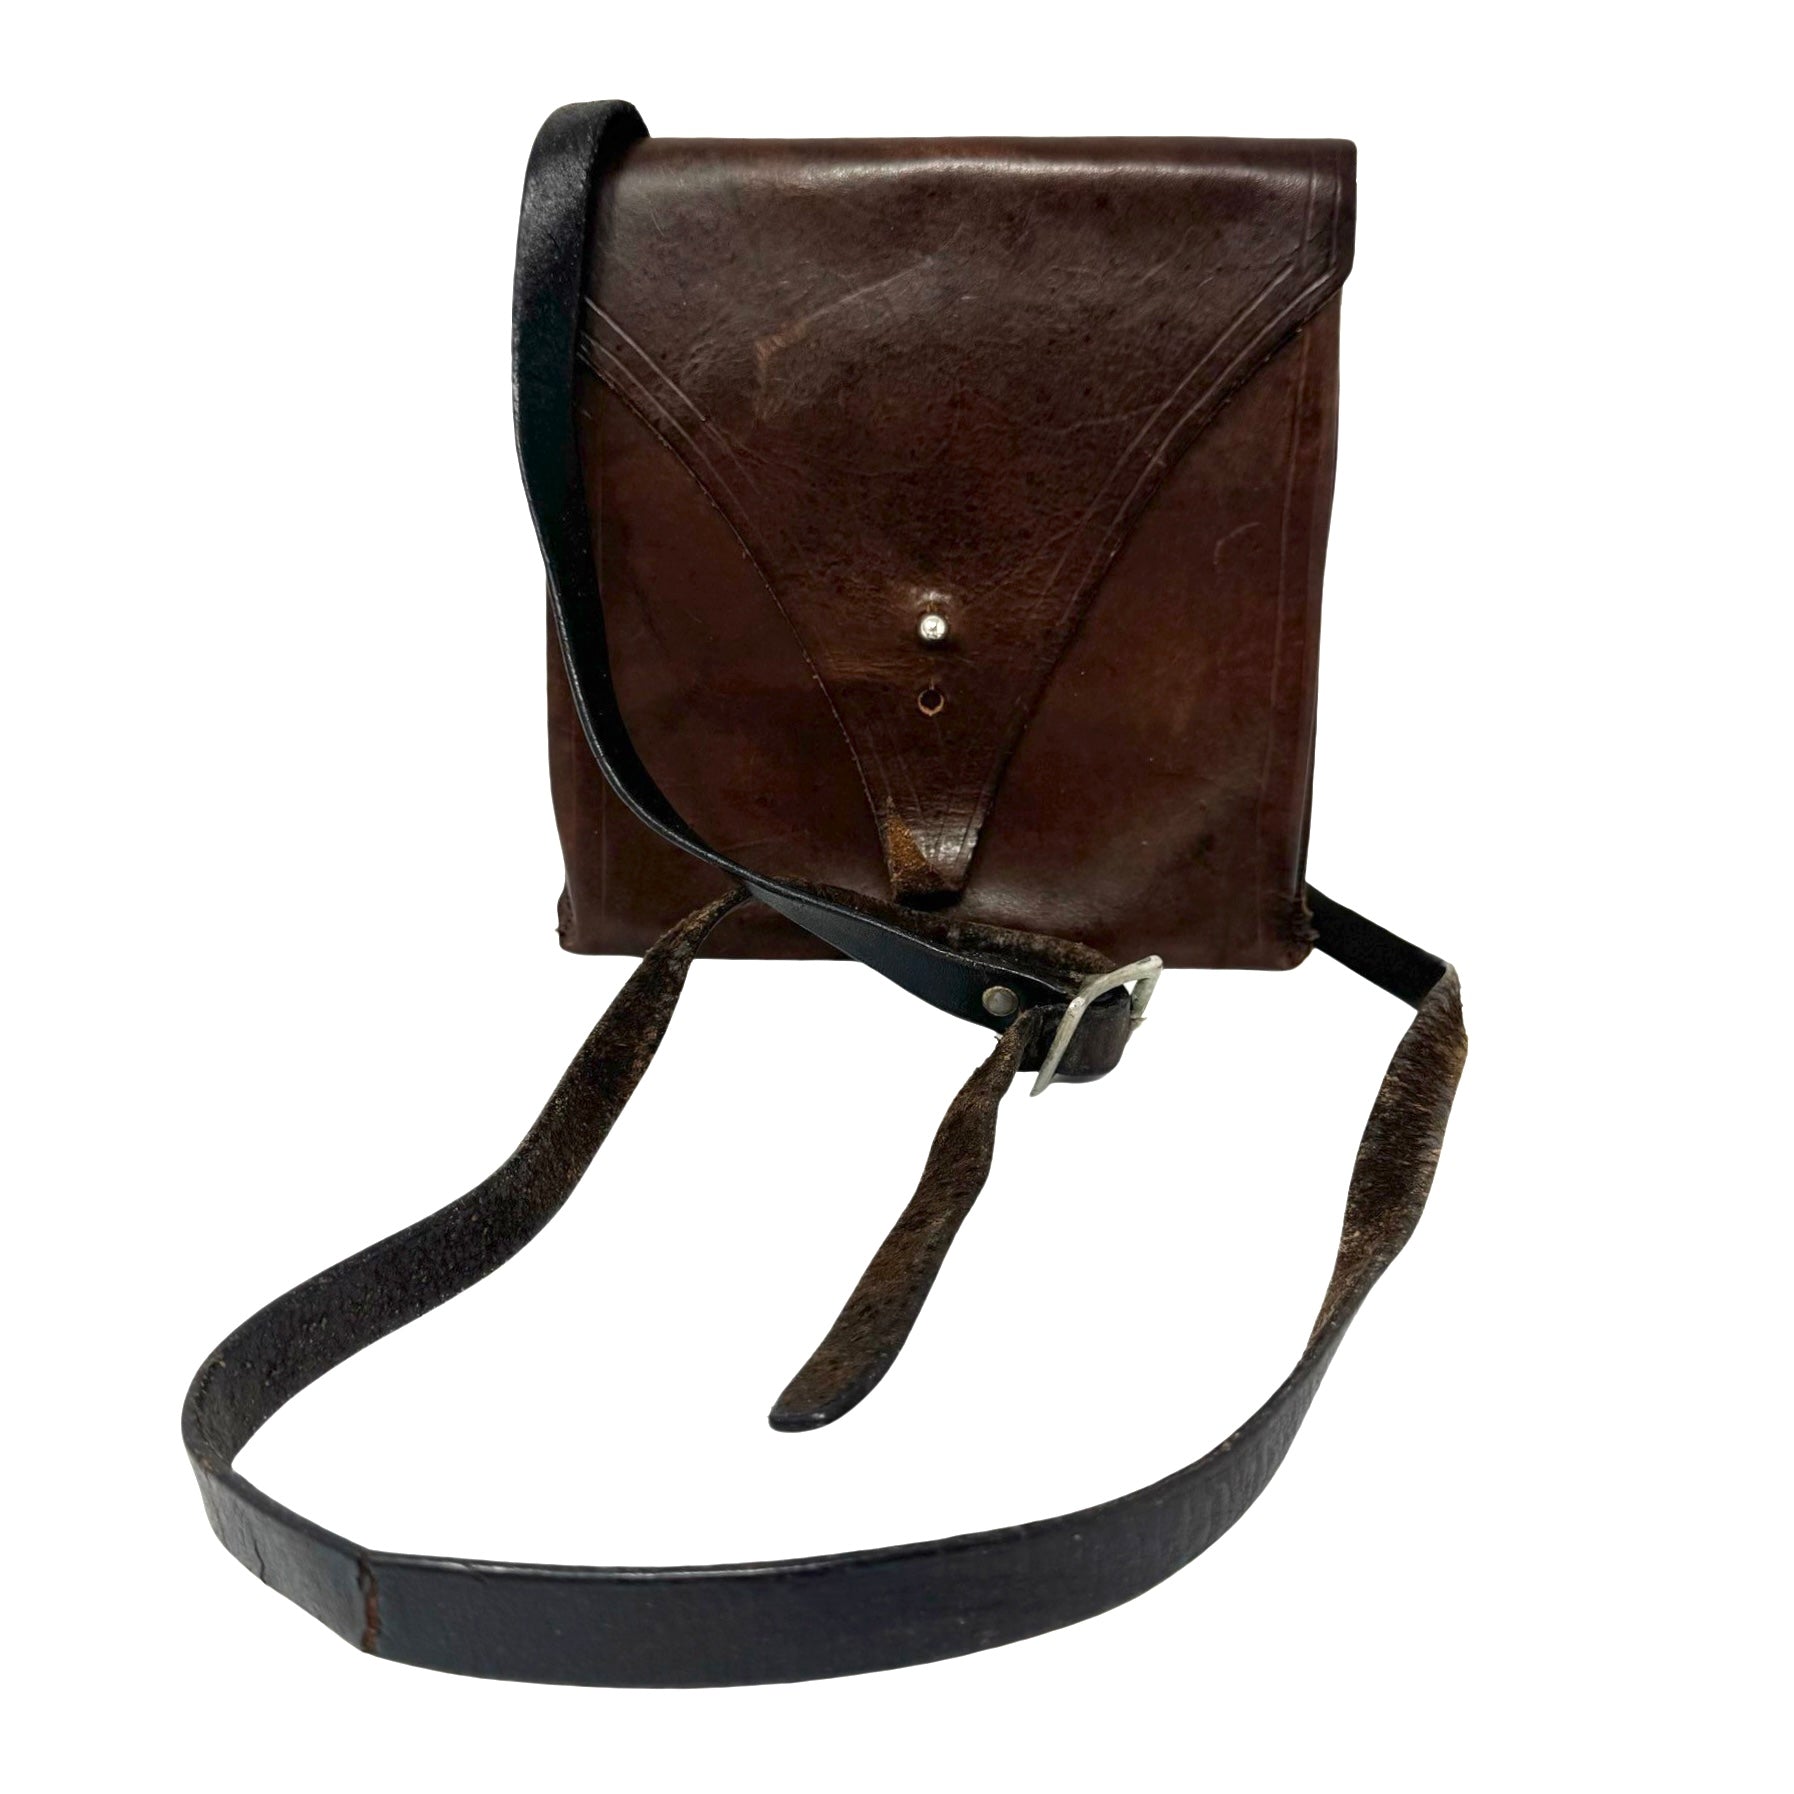 Vintage Leather Square Pouch Crossbody Bag